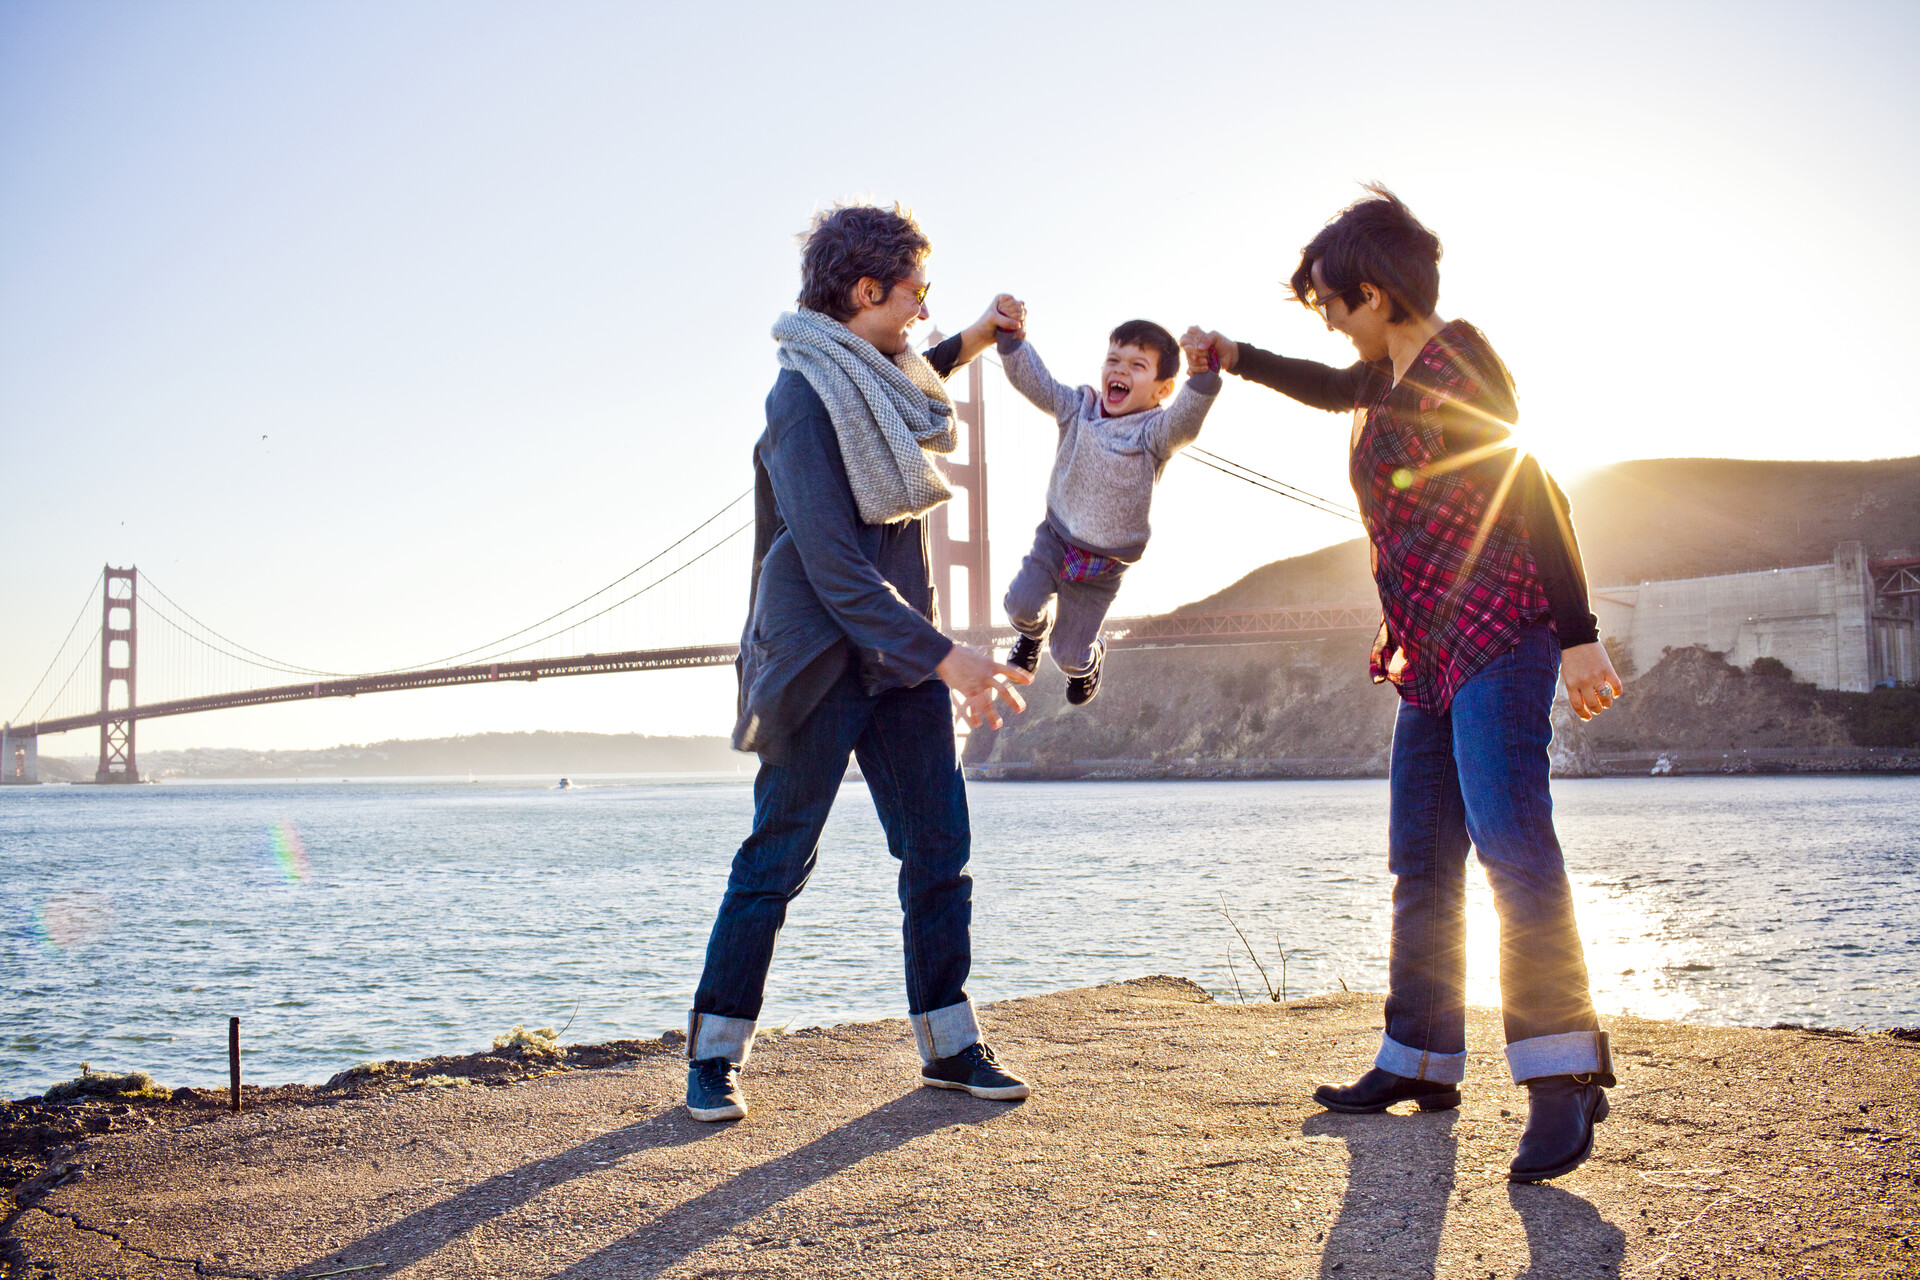 Two people swing a child by the arms in front of the Golden Gate Bridge as the sun goes down.